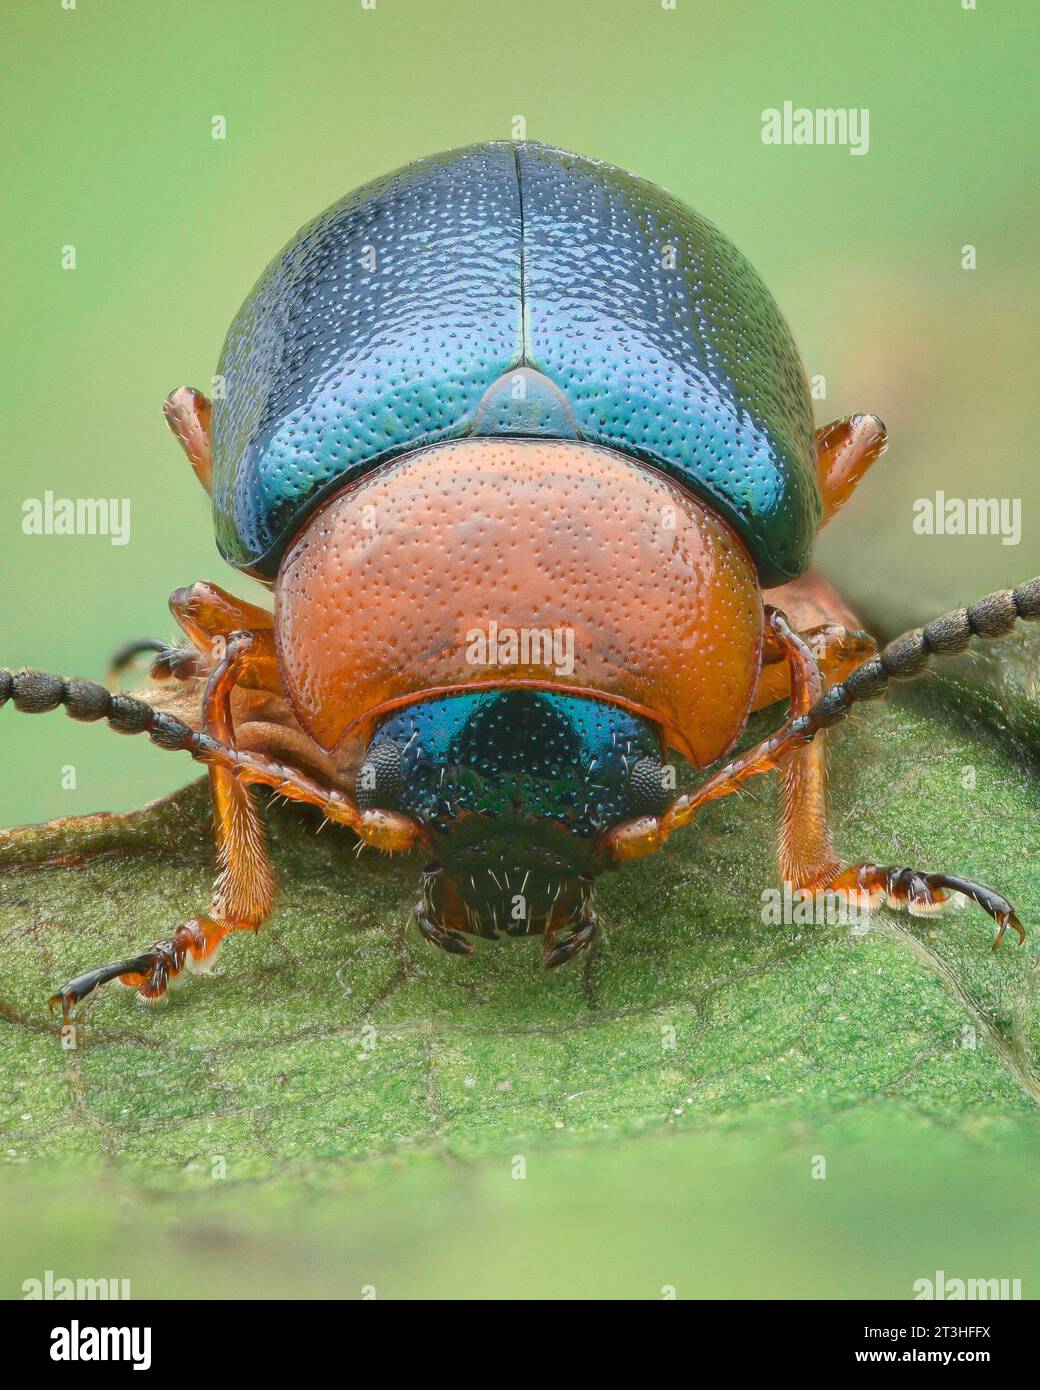 Portrait of a blue Leaf Beetle with orange pronotum and legs, green background (Knotweed Leaf Beetle, Gastrophysa polygoni) Stock Photo